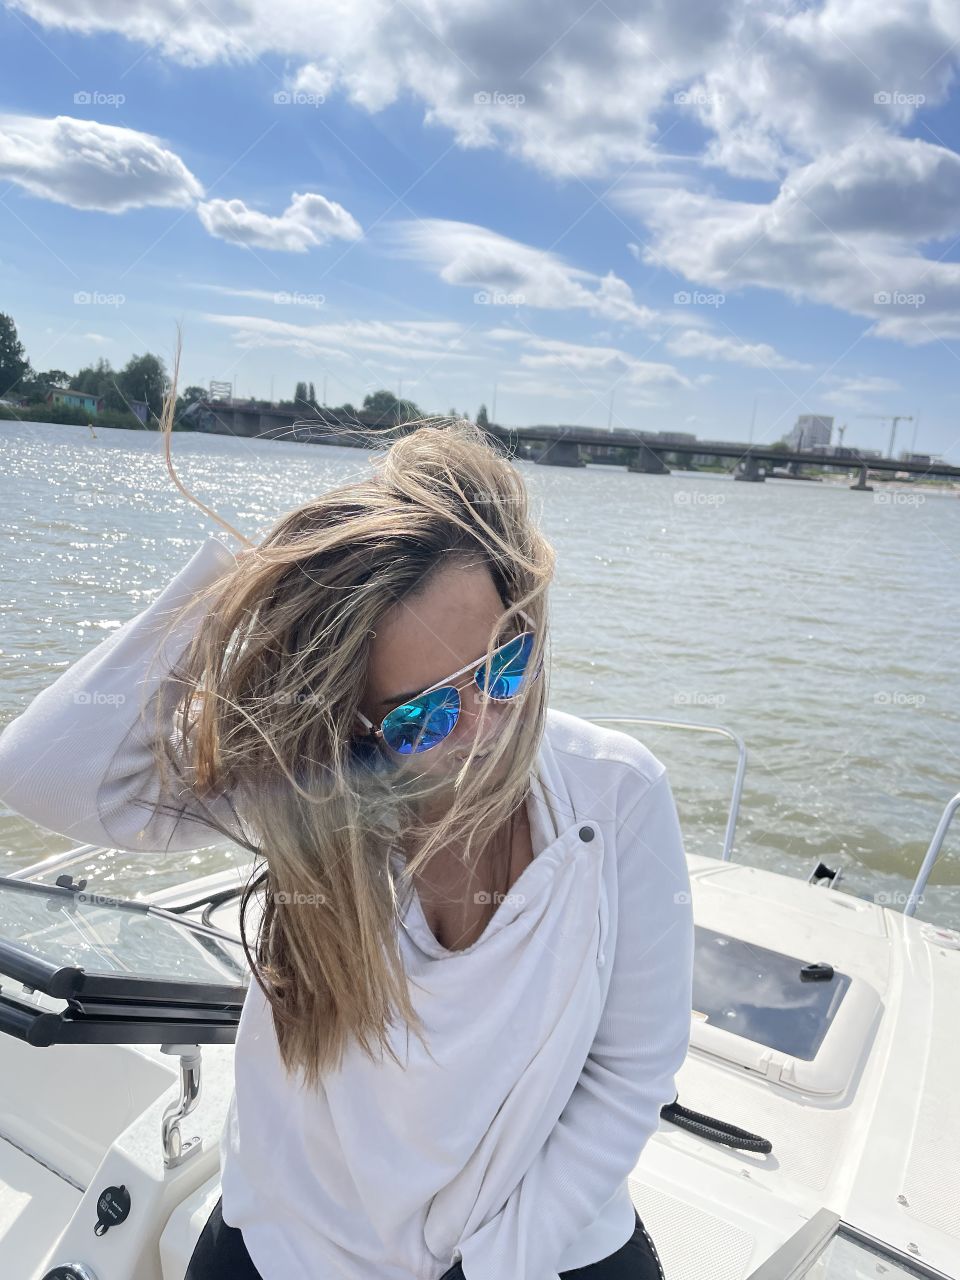 Summertime on a boat. A blond girl with messy hair due to a windy boat ride